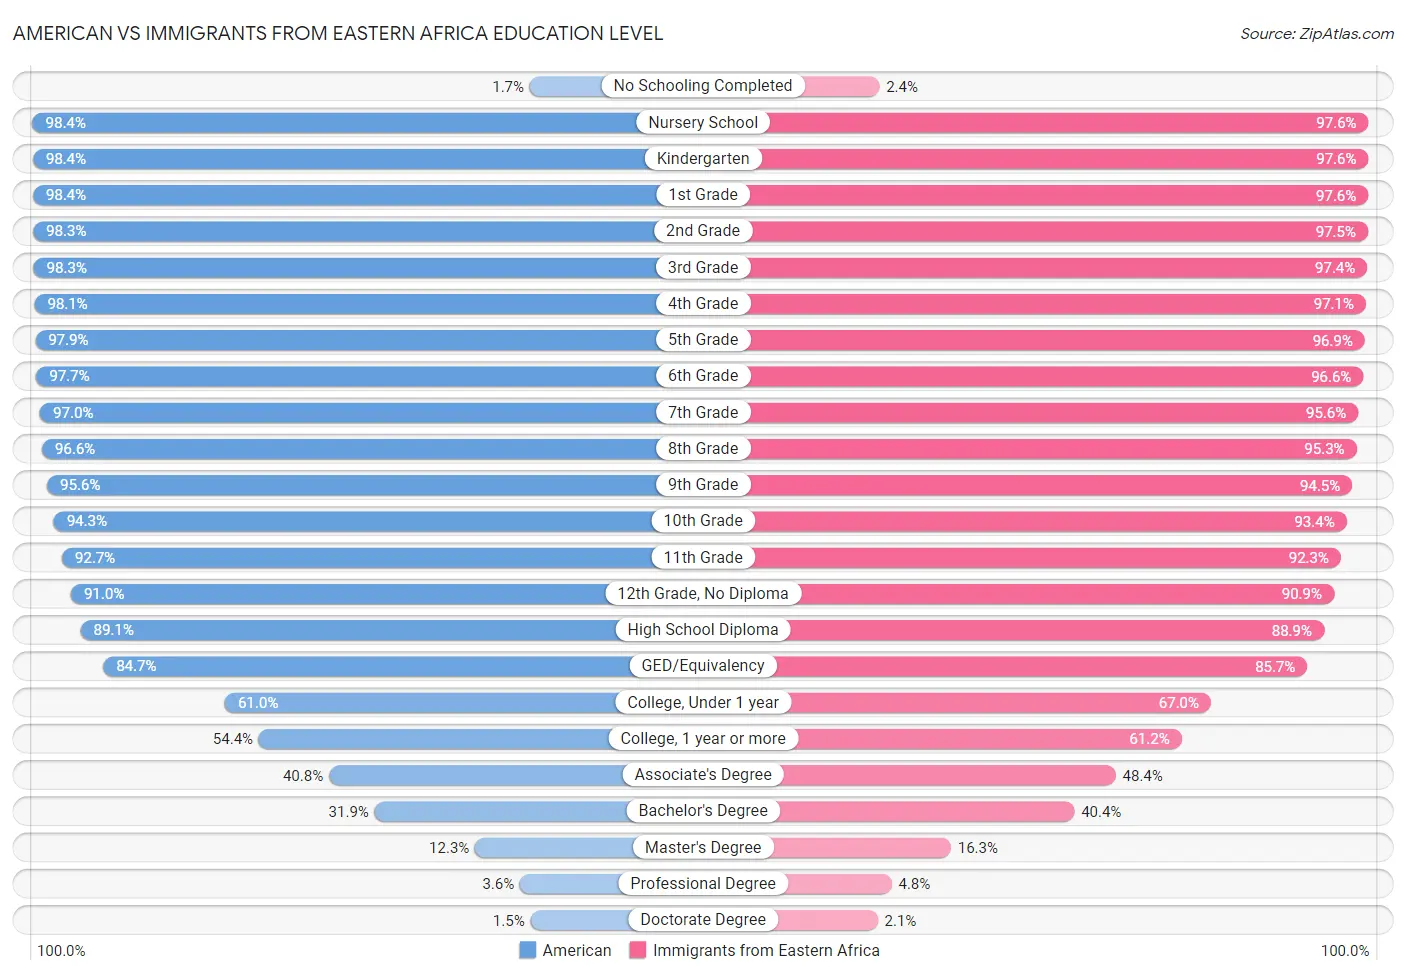 American vs Immigrants from Eastern Africa Education Level